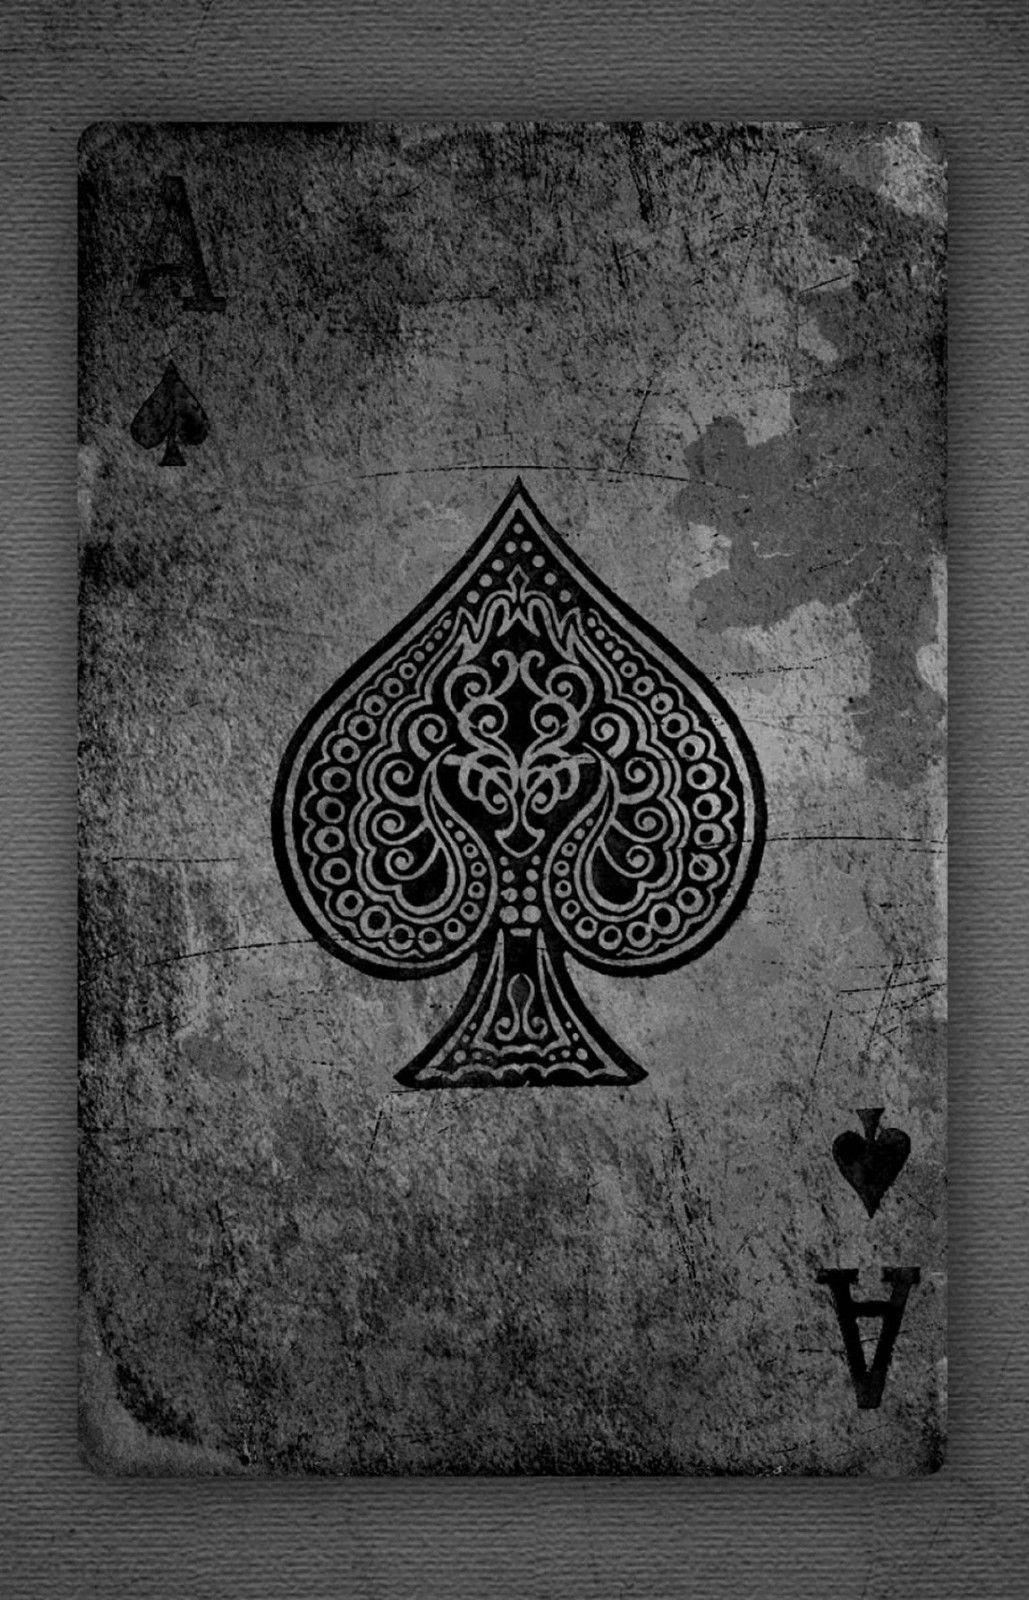 A3 Poster and White Vintage Ace of Spades Playing